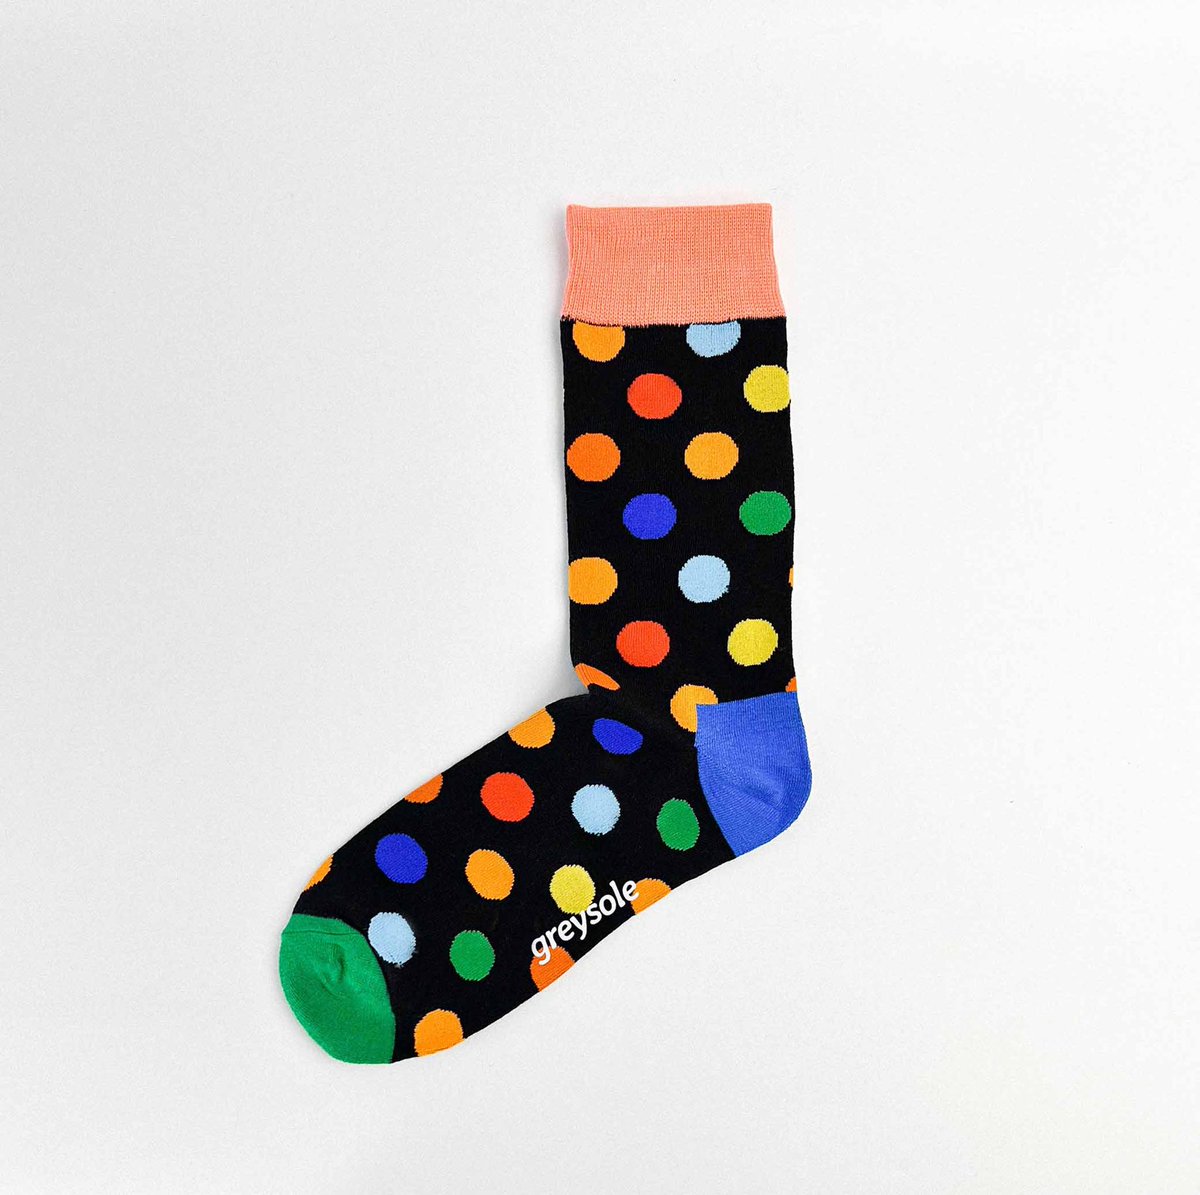 GS Multicoloured Polka Dot Socks - Their thick, cushioned feel, stretchy fit, and stylish polka dot design make them a versatile addition to your wardrobe 

🏷️40ghc

Kindly visit our website thegreysole.com or send us a DM to place an order